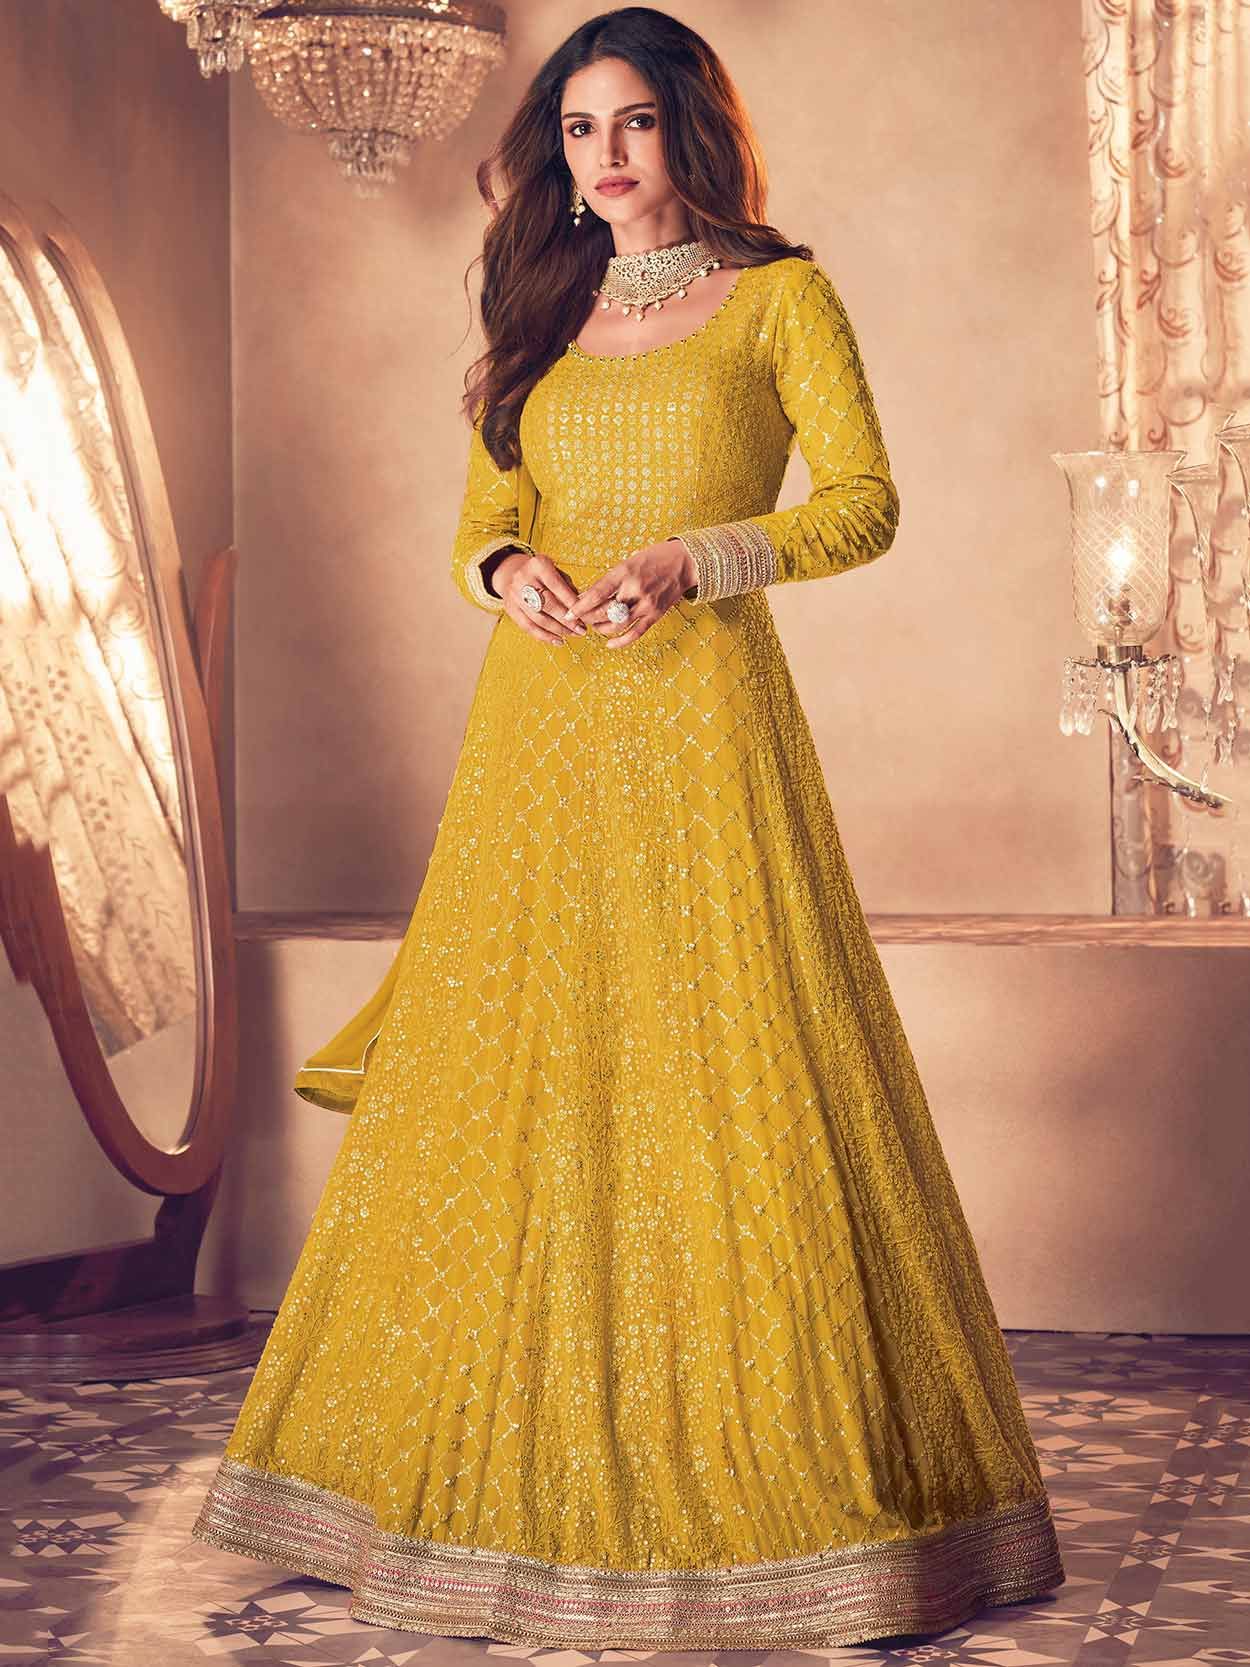 Top more than 151 yellow colour suit latest